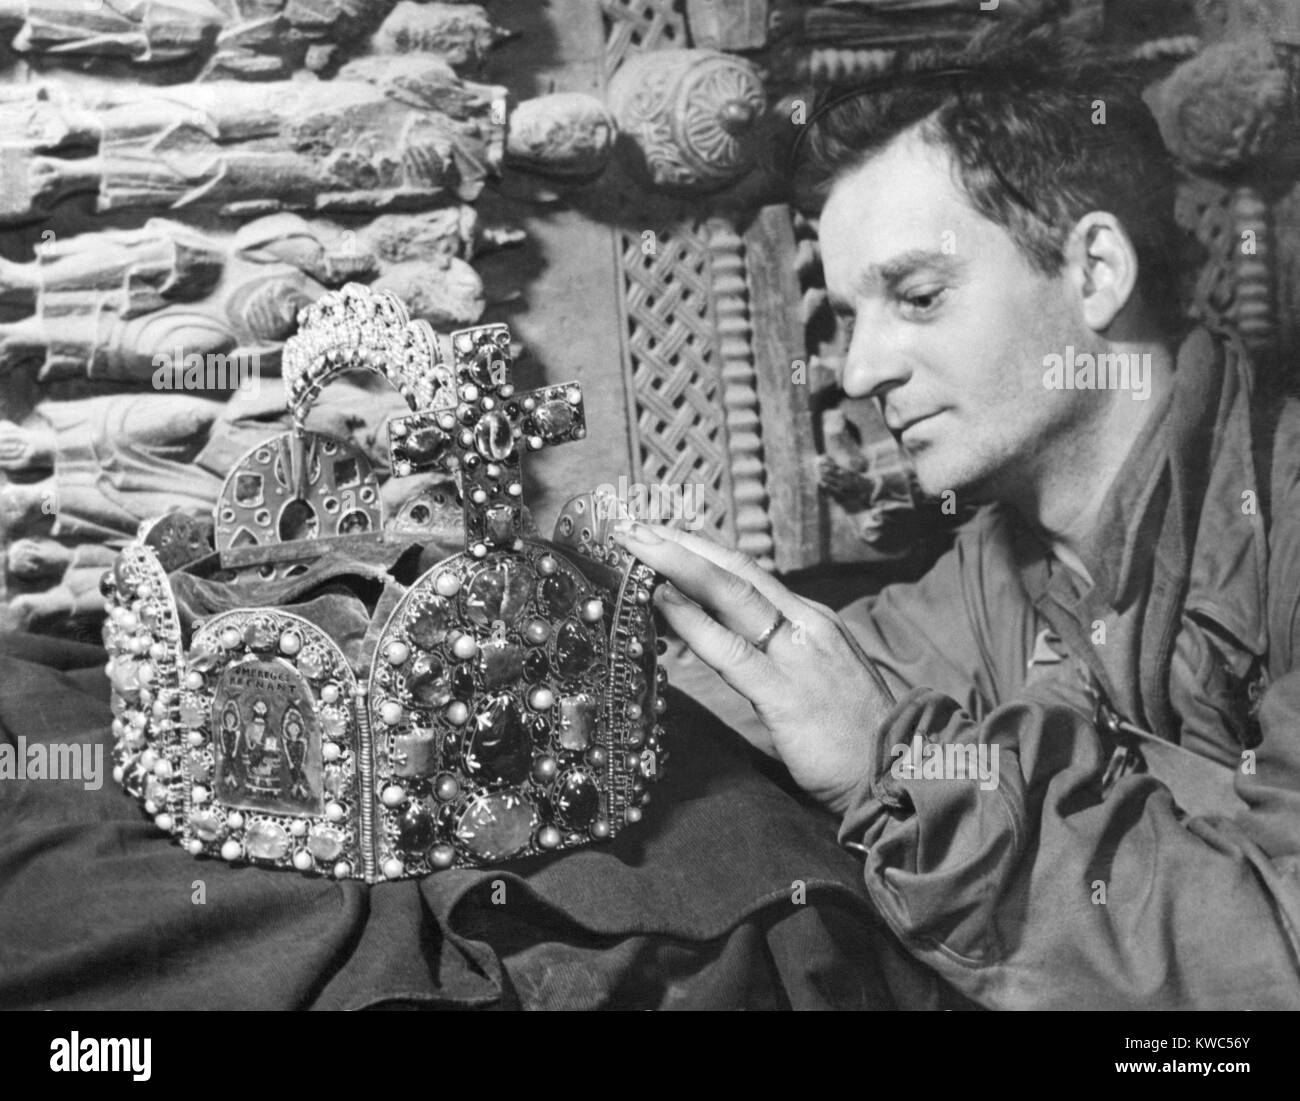 U.S. Soldier with 'Crown of Charlemagne' in a cave in Siegen, Germany. It was among many looted art treasures hidden there and in hundreds of other sites across Germany. U.S. Army Monuments, Fine Arts, and Archives (MFA&A) Section was responsible of the artwork's care and restitution. World War 2 (BSLOC 2015 13 96) Stock Photo